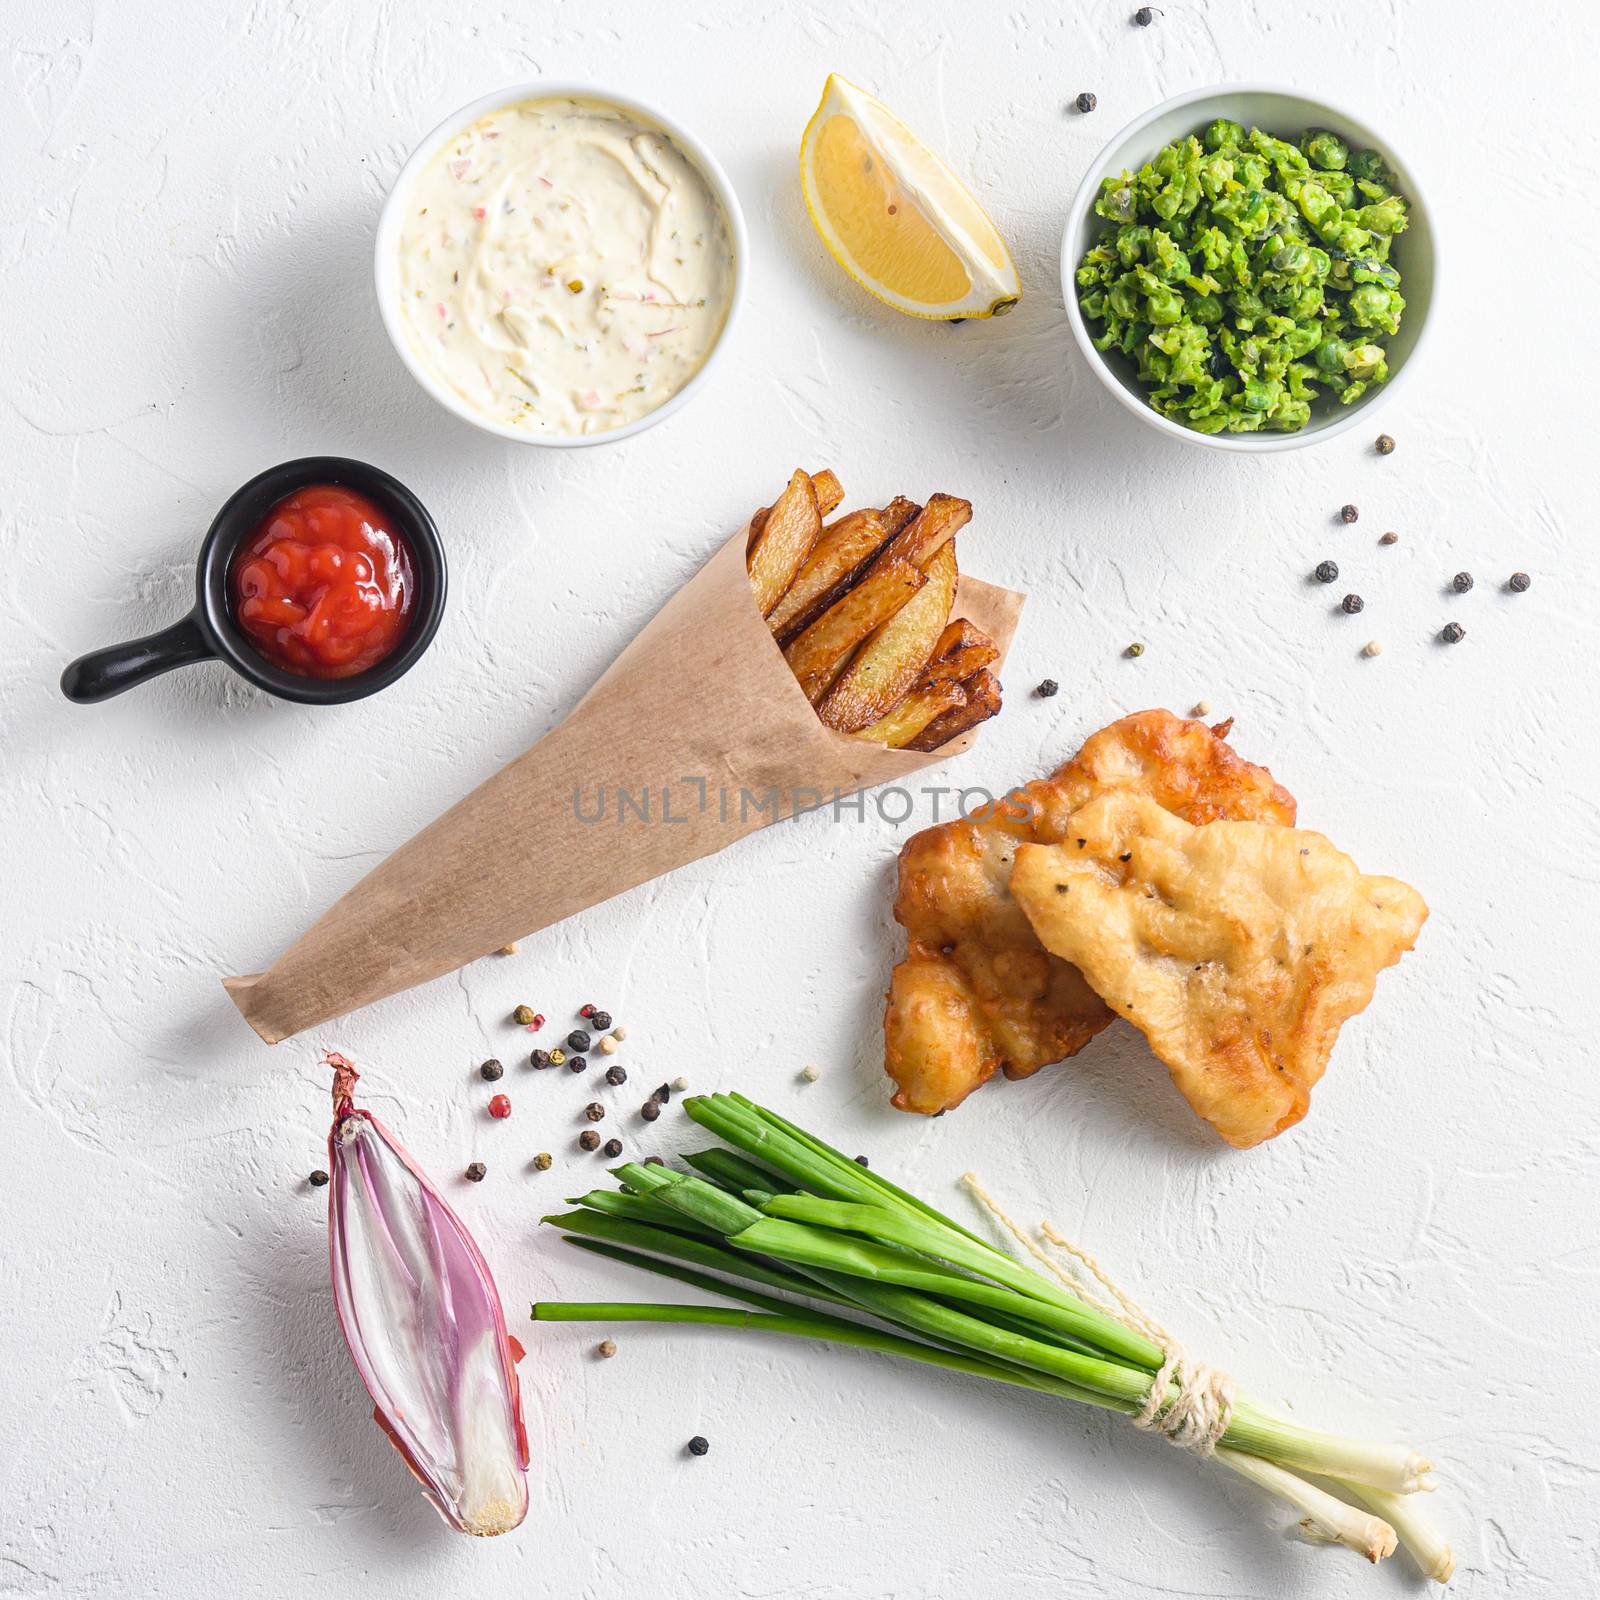 Fried fish and chips in a paper cone on white background with all components classic recipe takeaway food top view white stone textured background square crop.